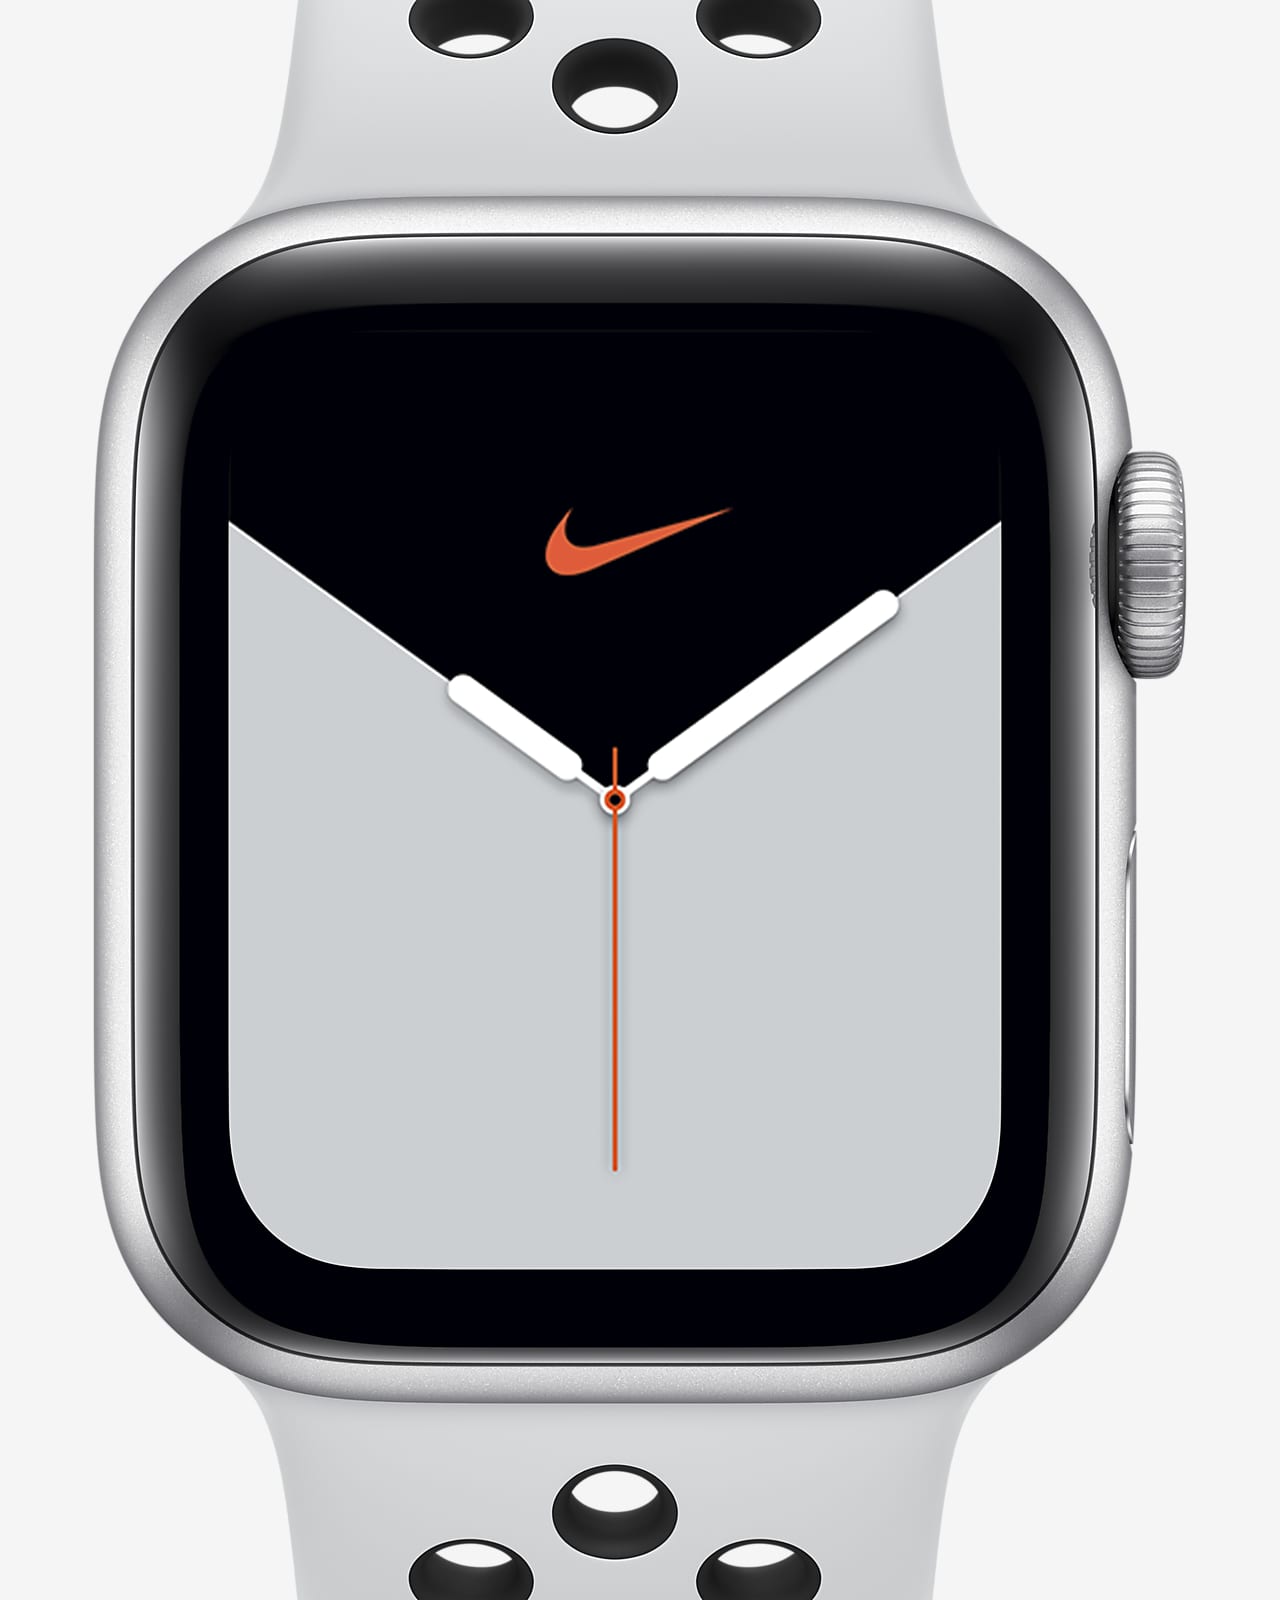 difference between apple watch series 5 nike and regular